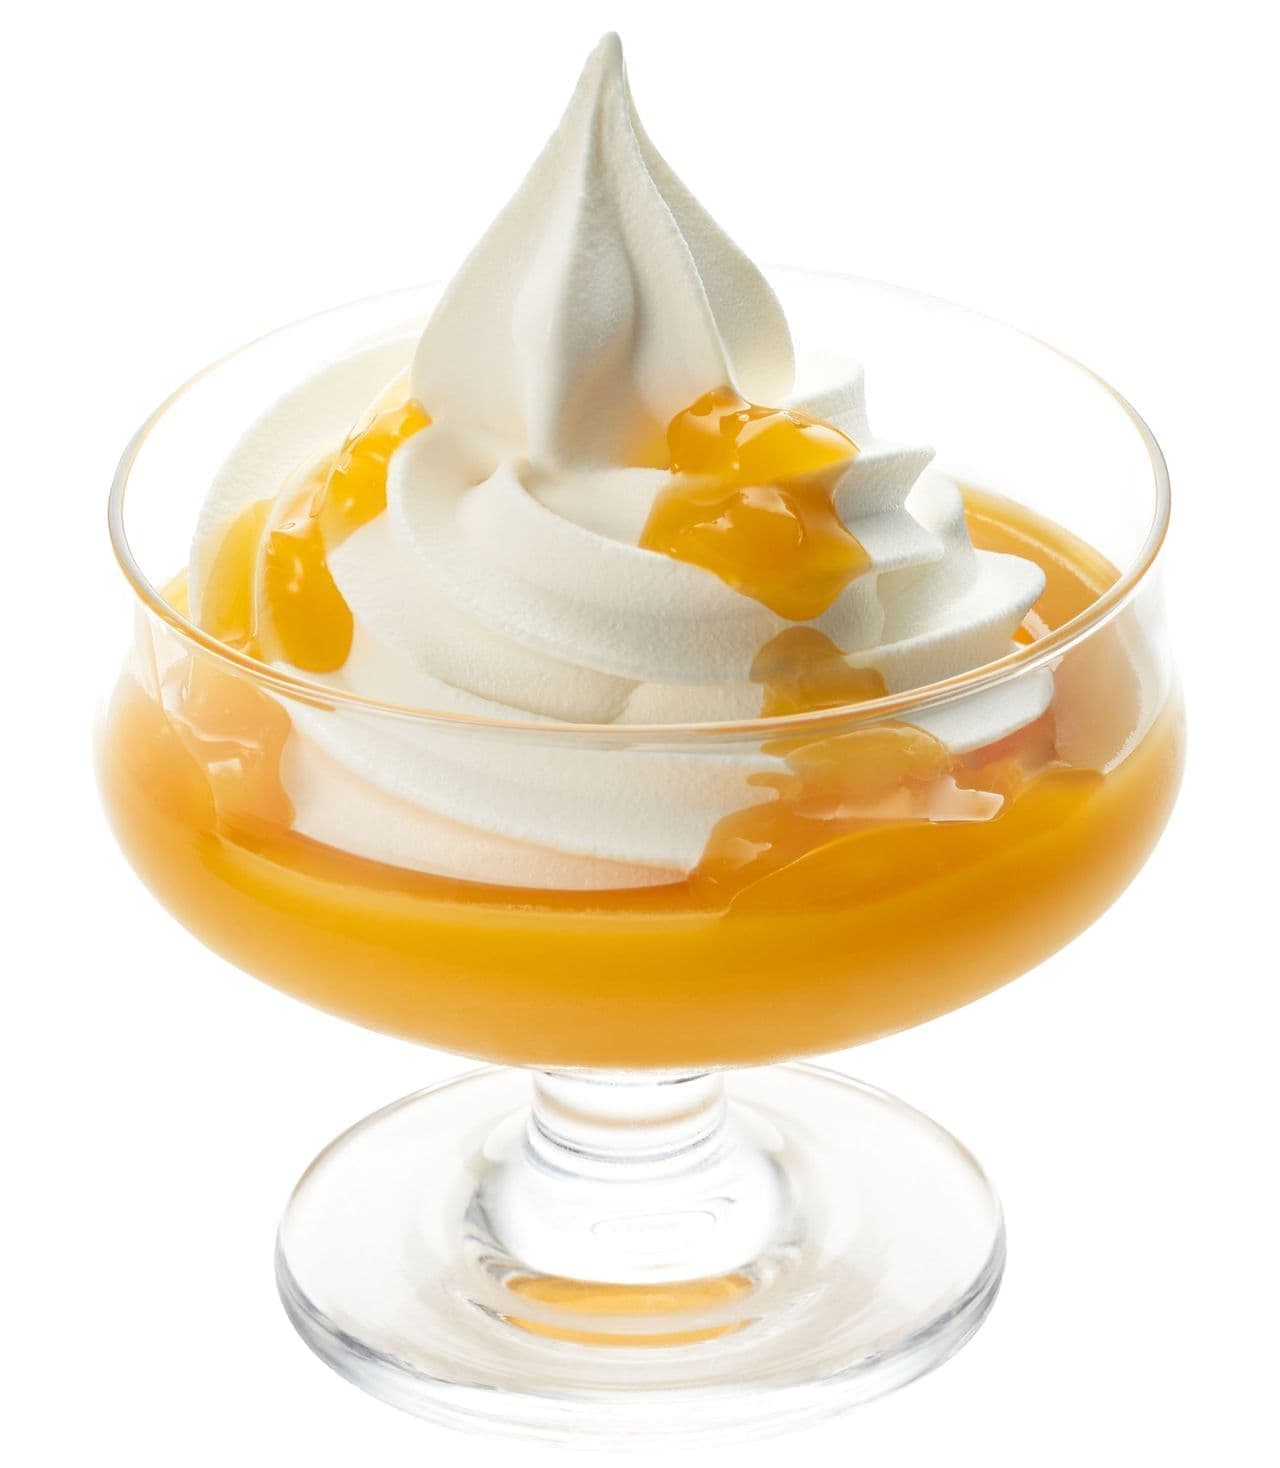 Cafe Veloce "Thick and Thick Mango Jelly